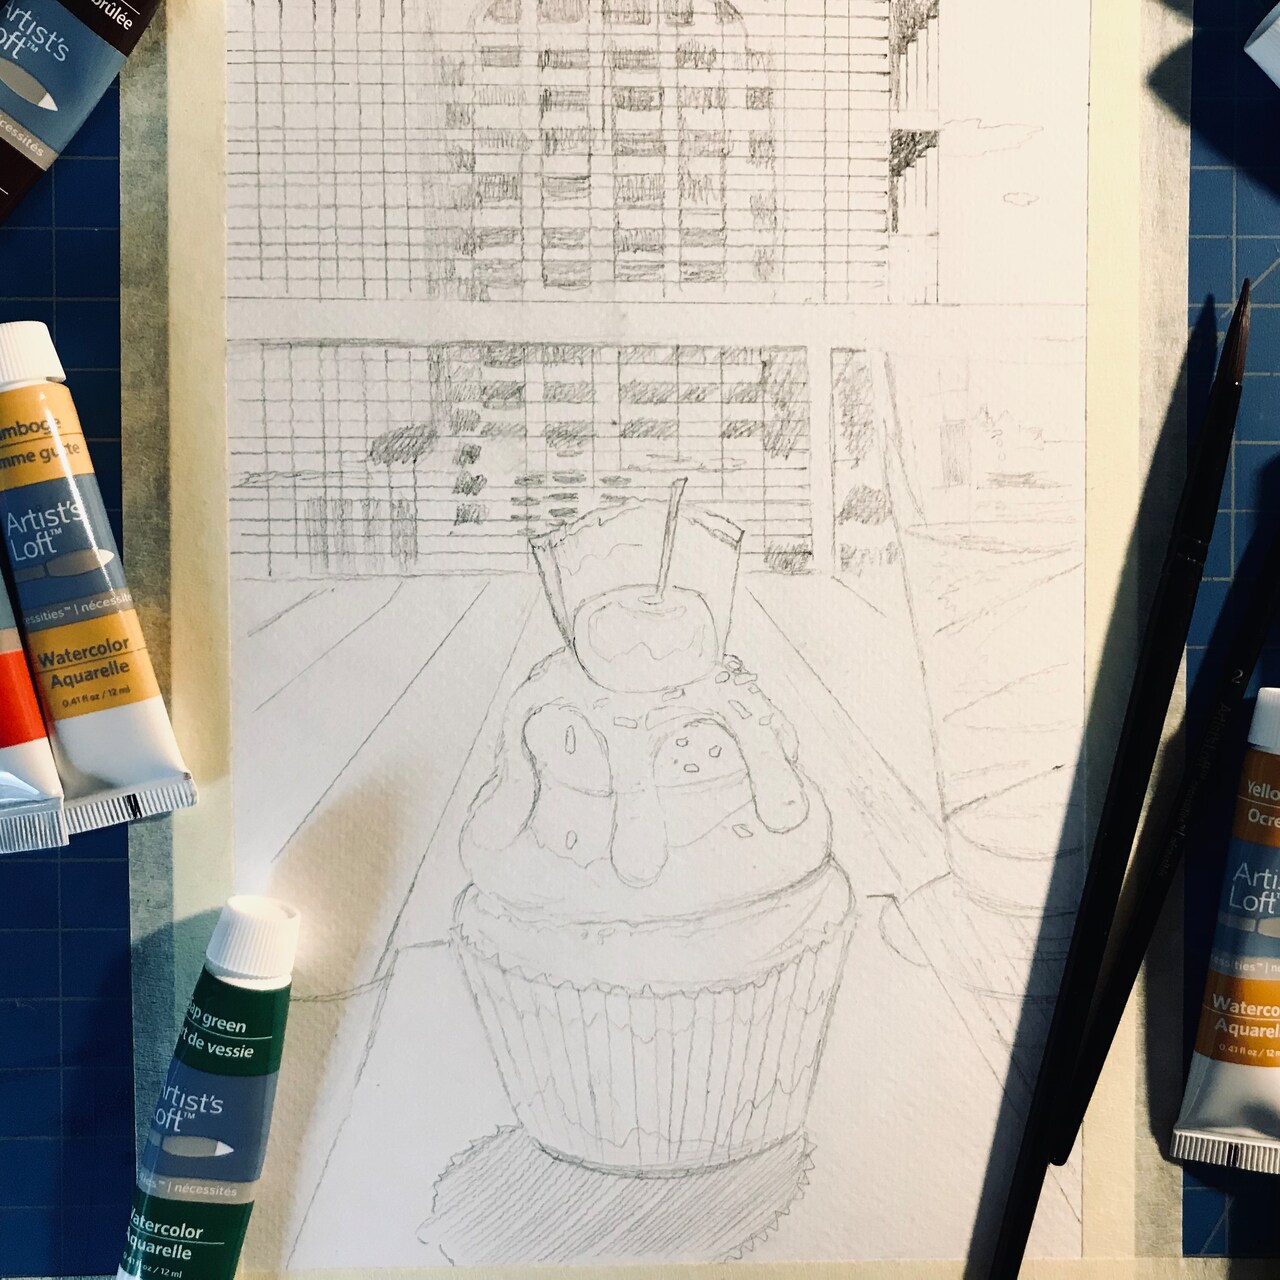 Painting a One-Point Perspective Cupcake, Part I